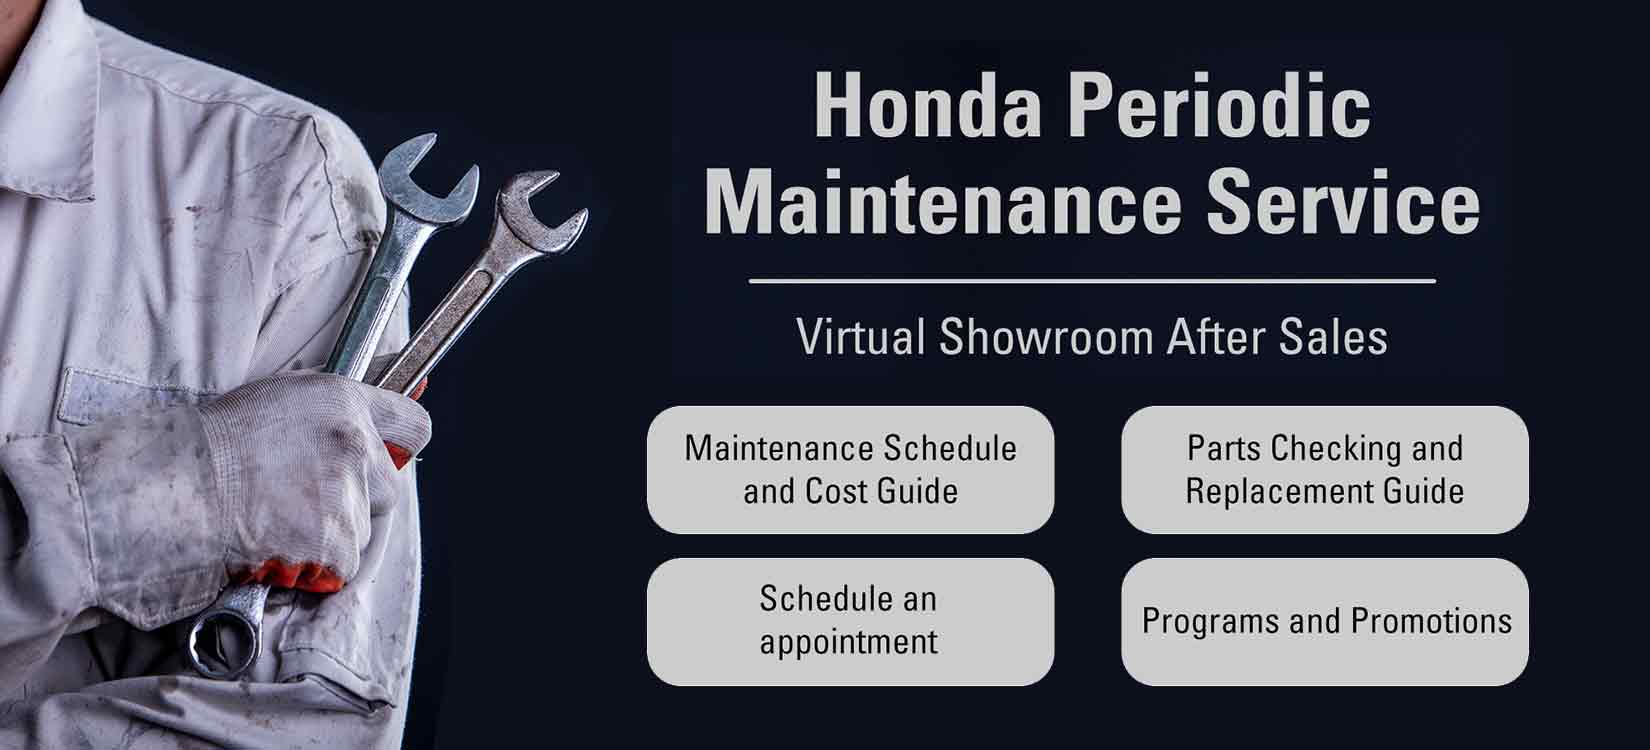 Know more about Hondaâ€™s Periodic Maintenance Service